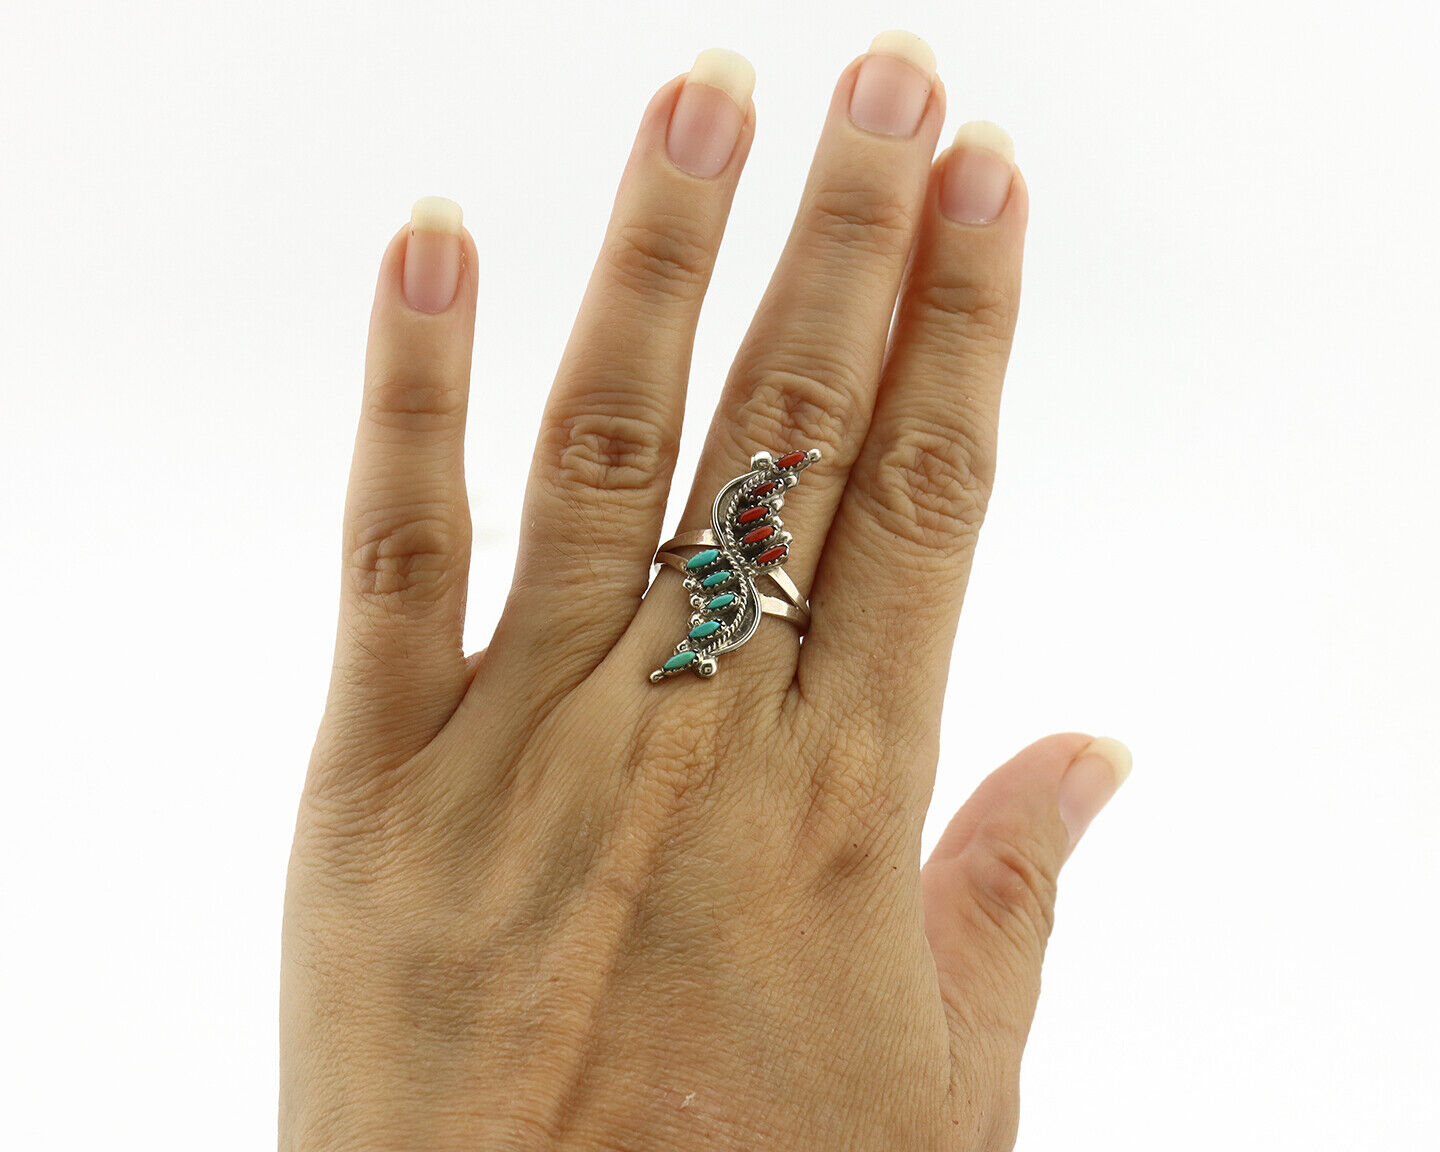 Zuni Ring 925 Silver Turquoise & Coral Handmade Native American Artist C.1980's